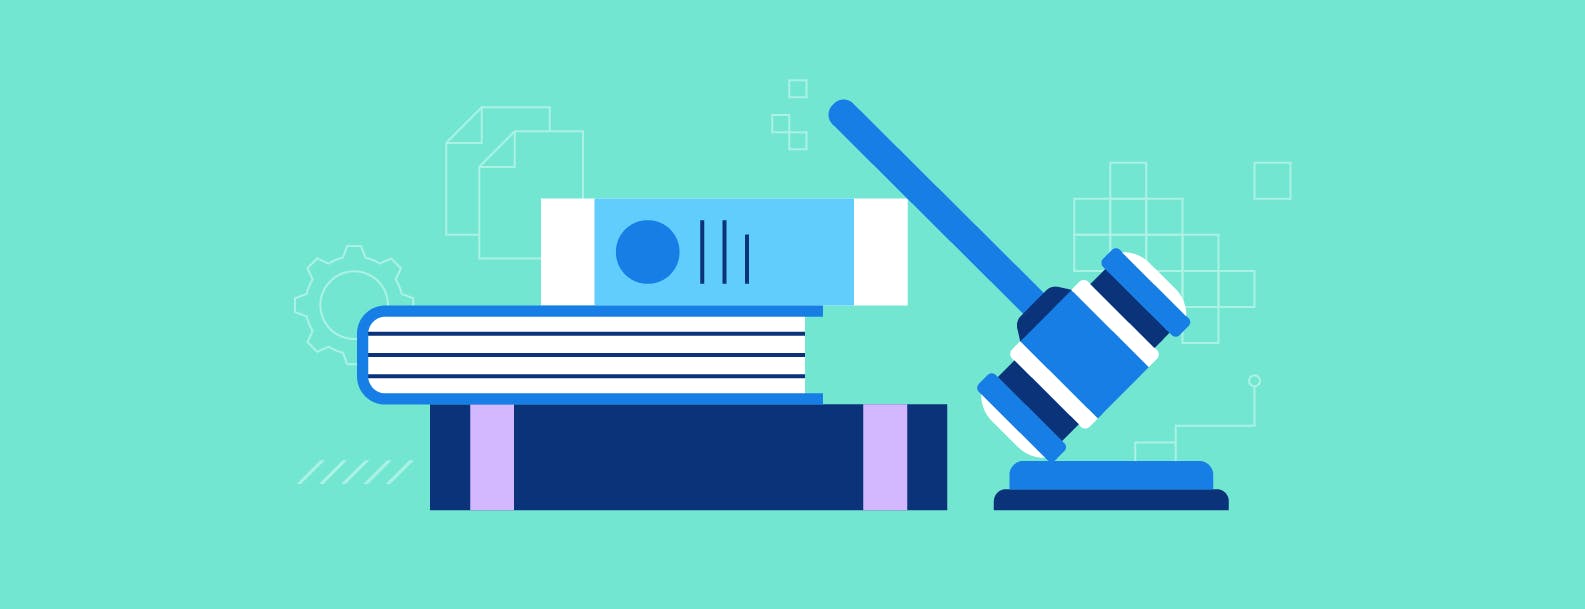 Teal background with icons of stacked books and a gavel leaning on the book stack depicting compliance risk. 